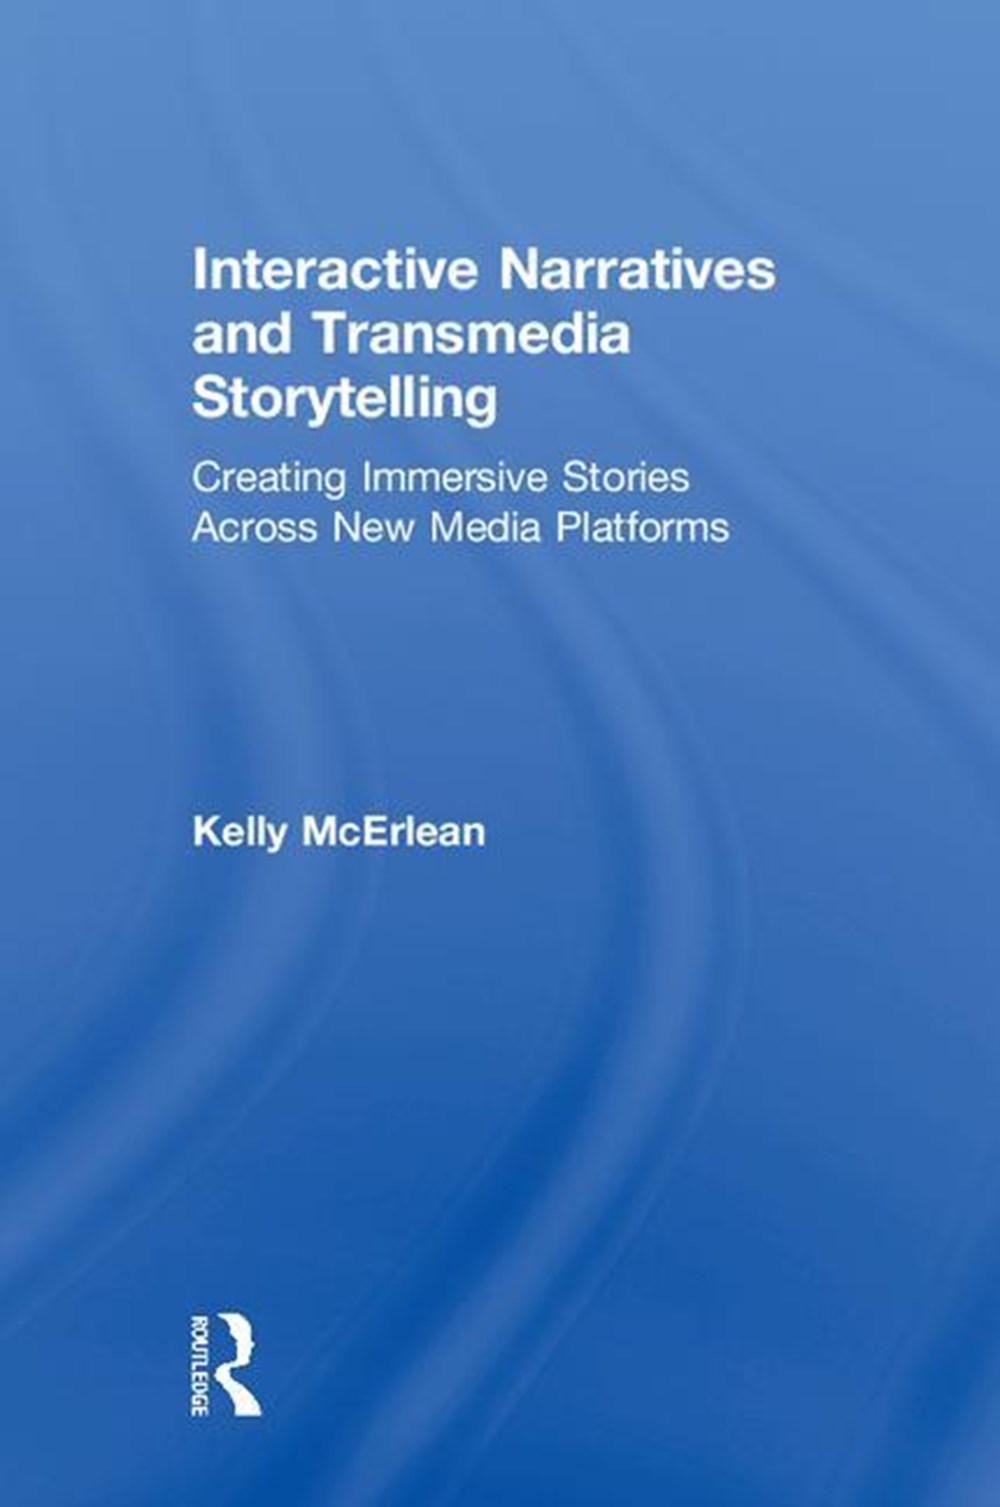 Interactive Narratives and Transmedia Storytelling: Creating Immersive Stories Across New Media Plat